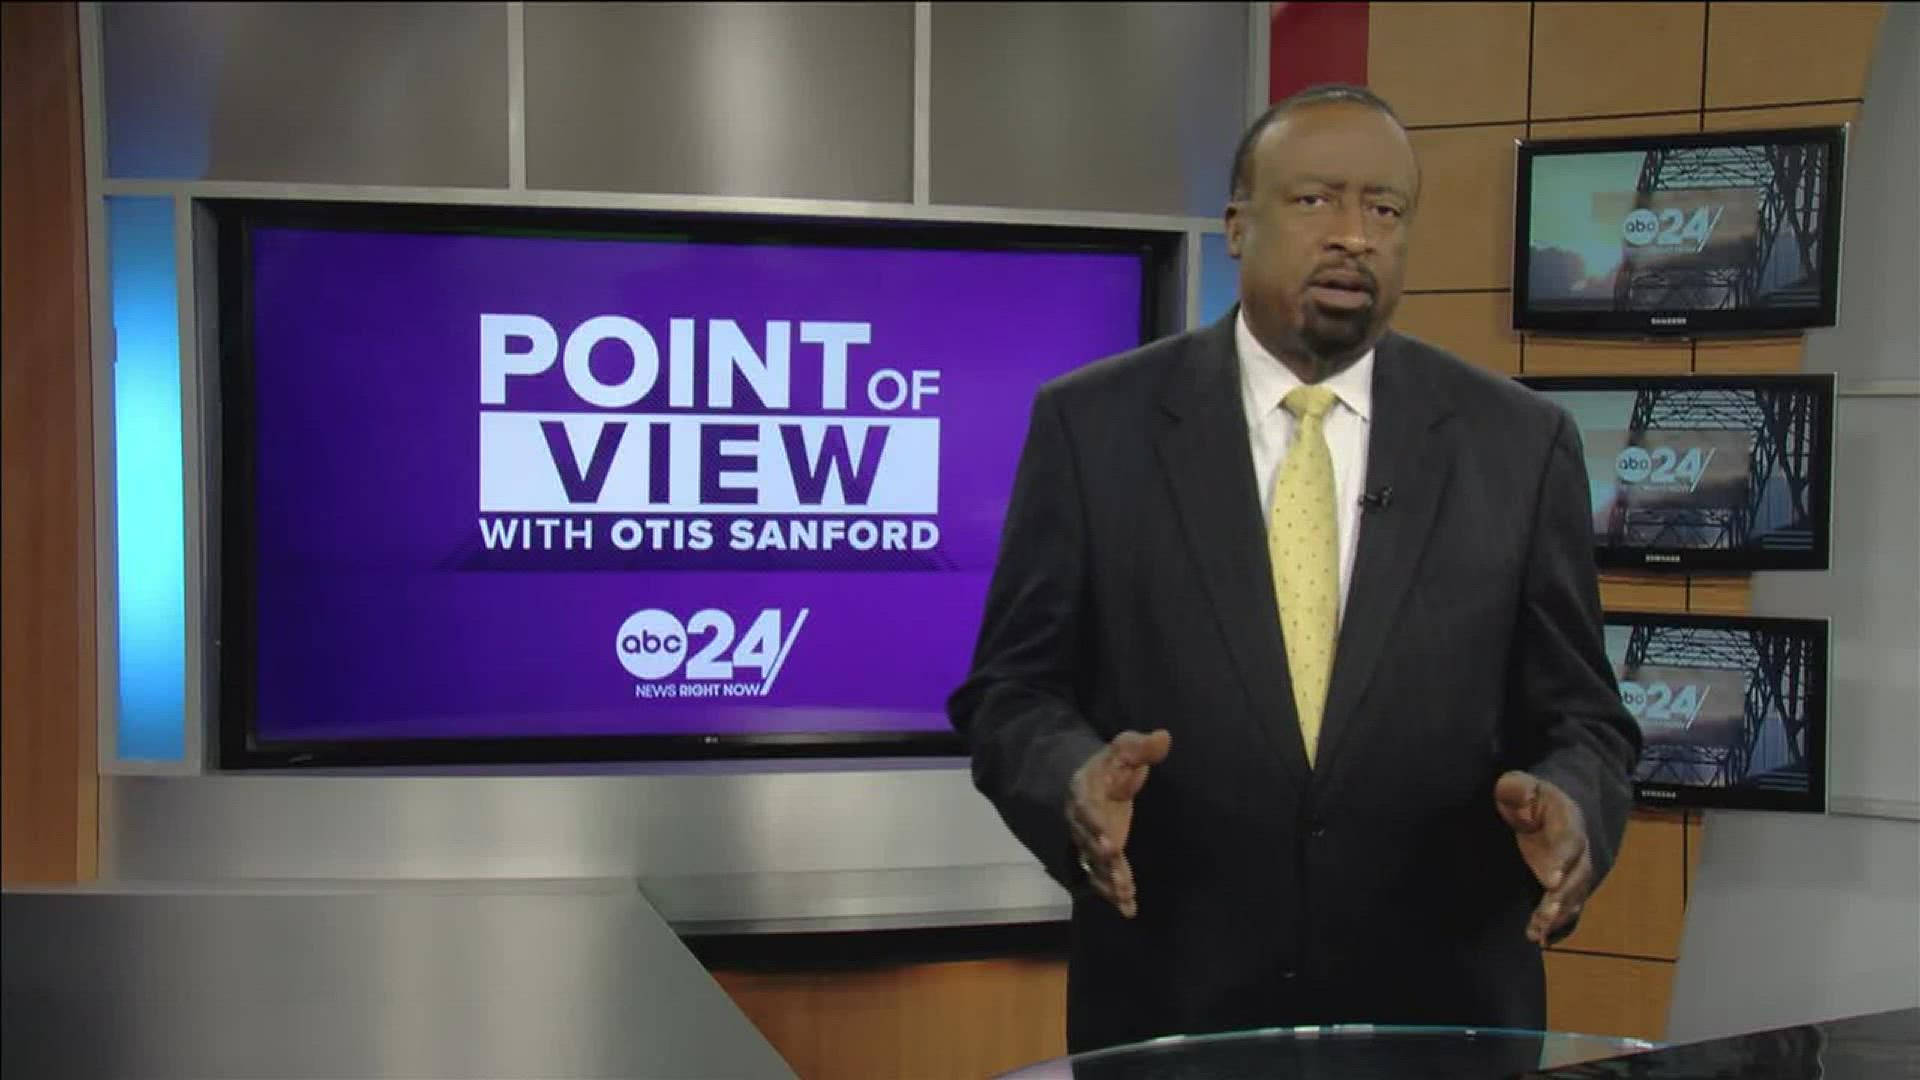 ABC 24 political analyst and commentator Otis Sanford shared his point of view on cracking down on drag racing and reckless drivers.